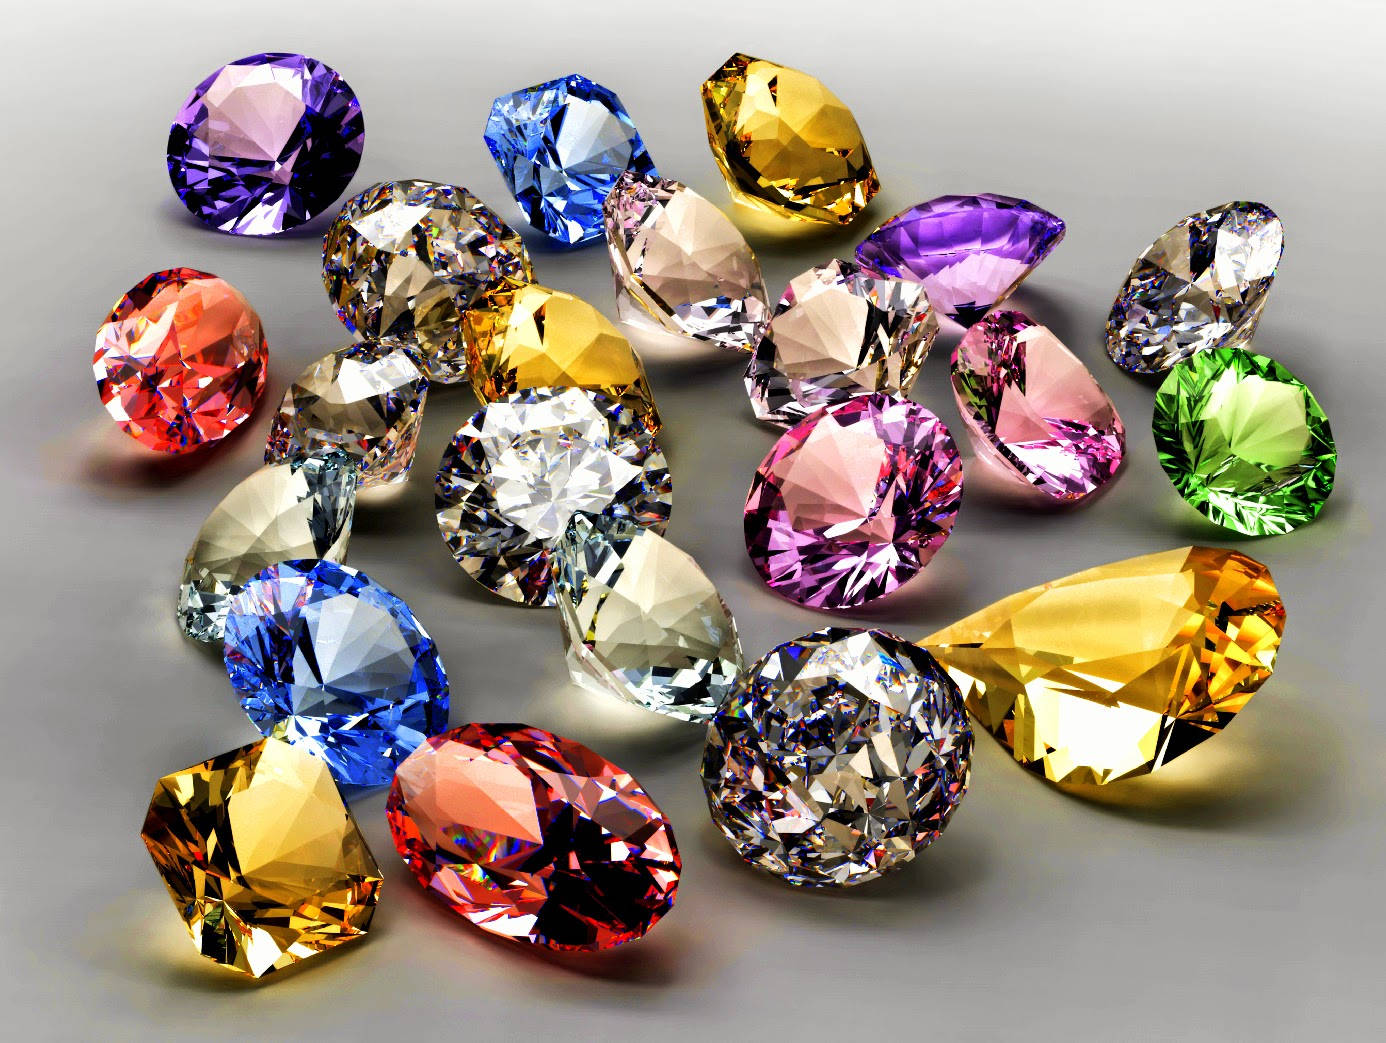 Free Crystal Wallpaper Downloads, [200+] Crystal Wallpapers for FREE |  